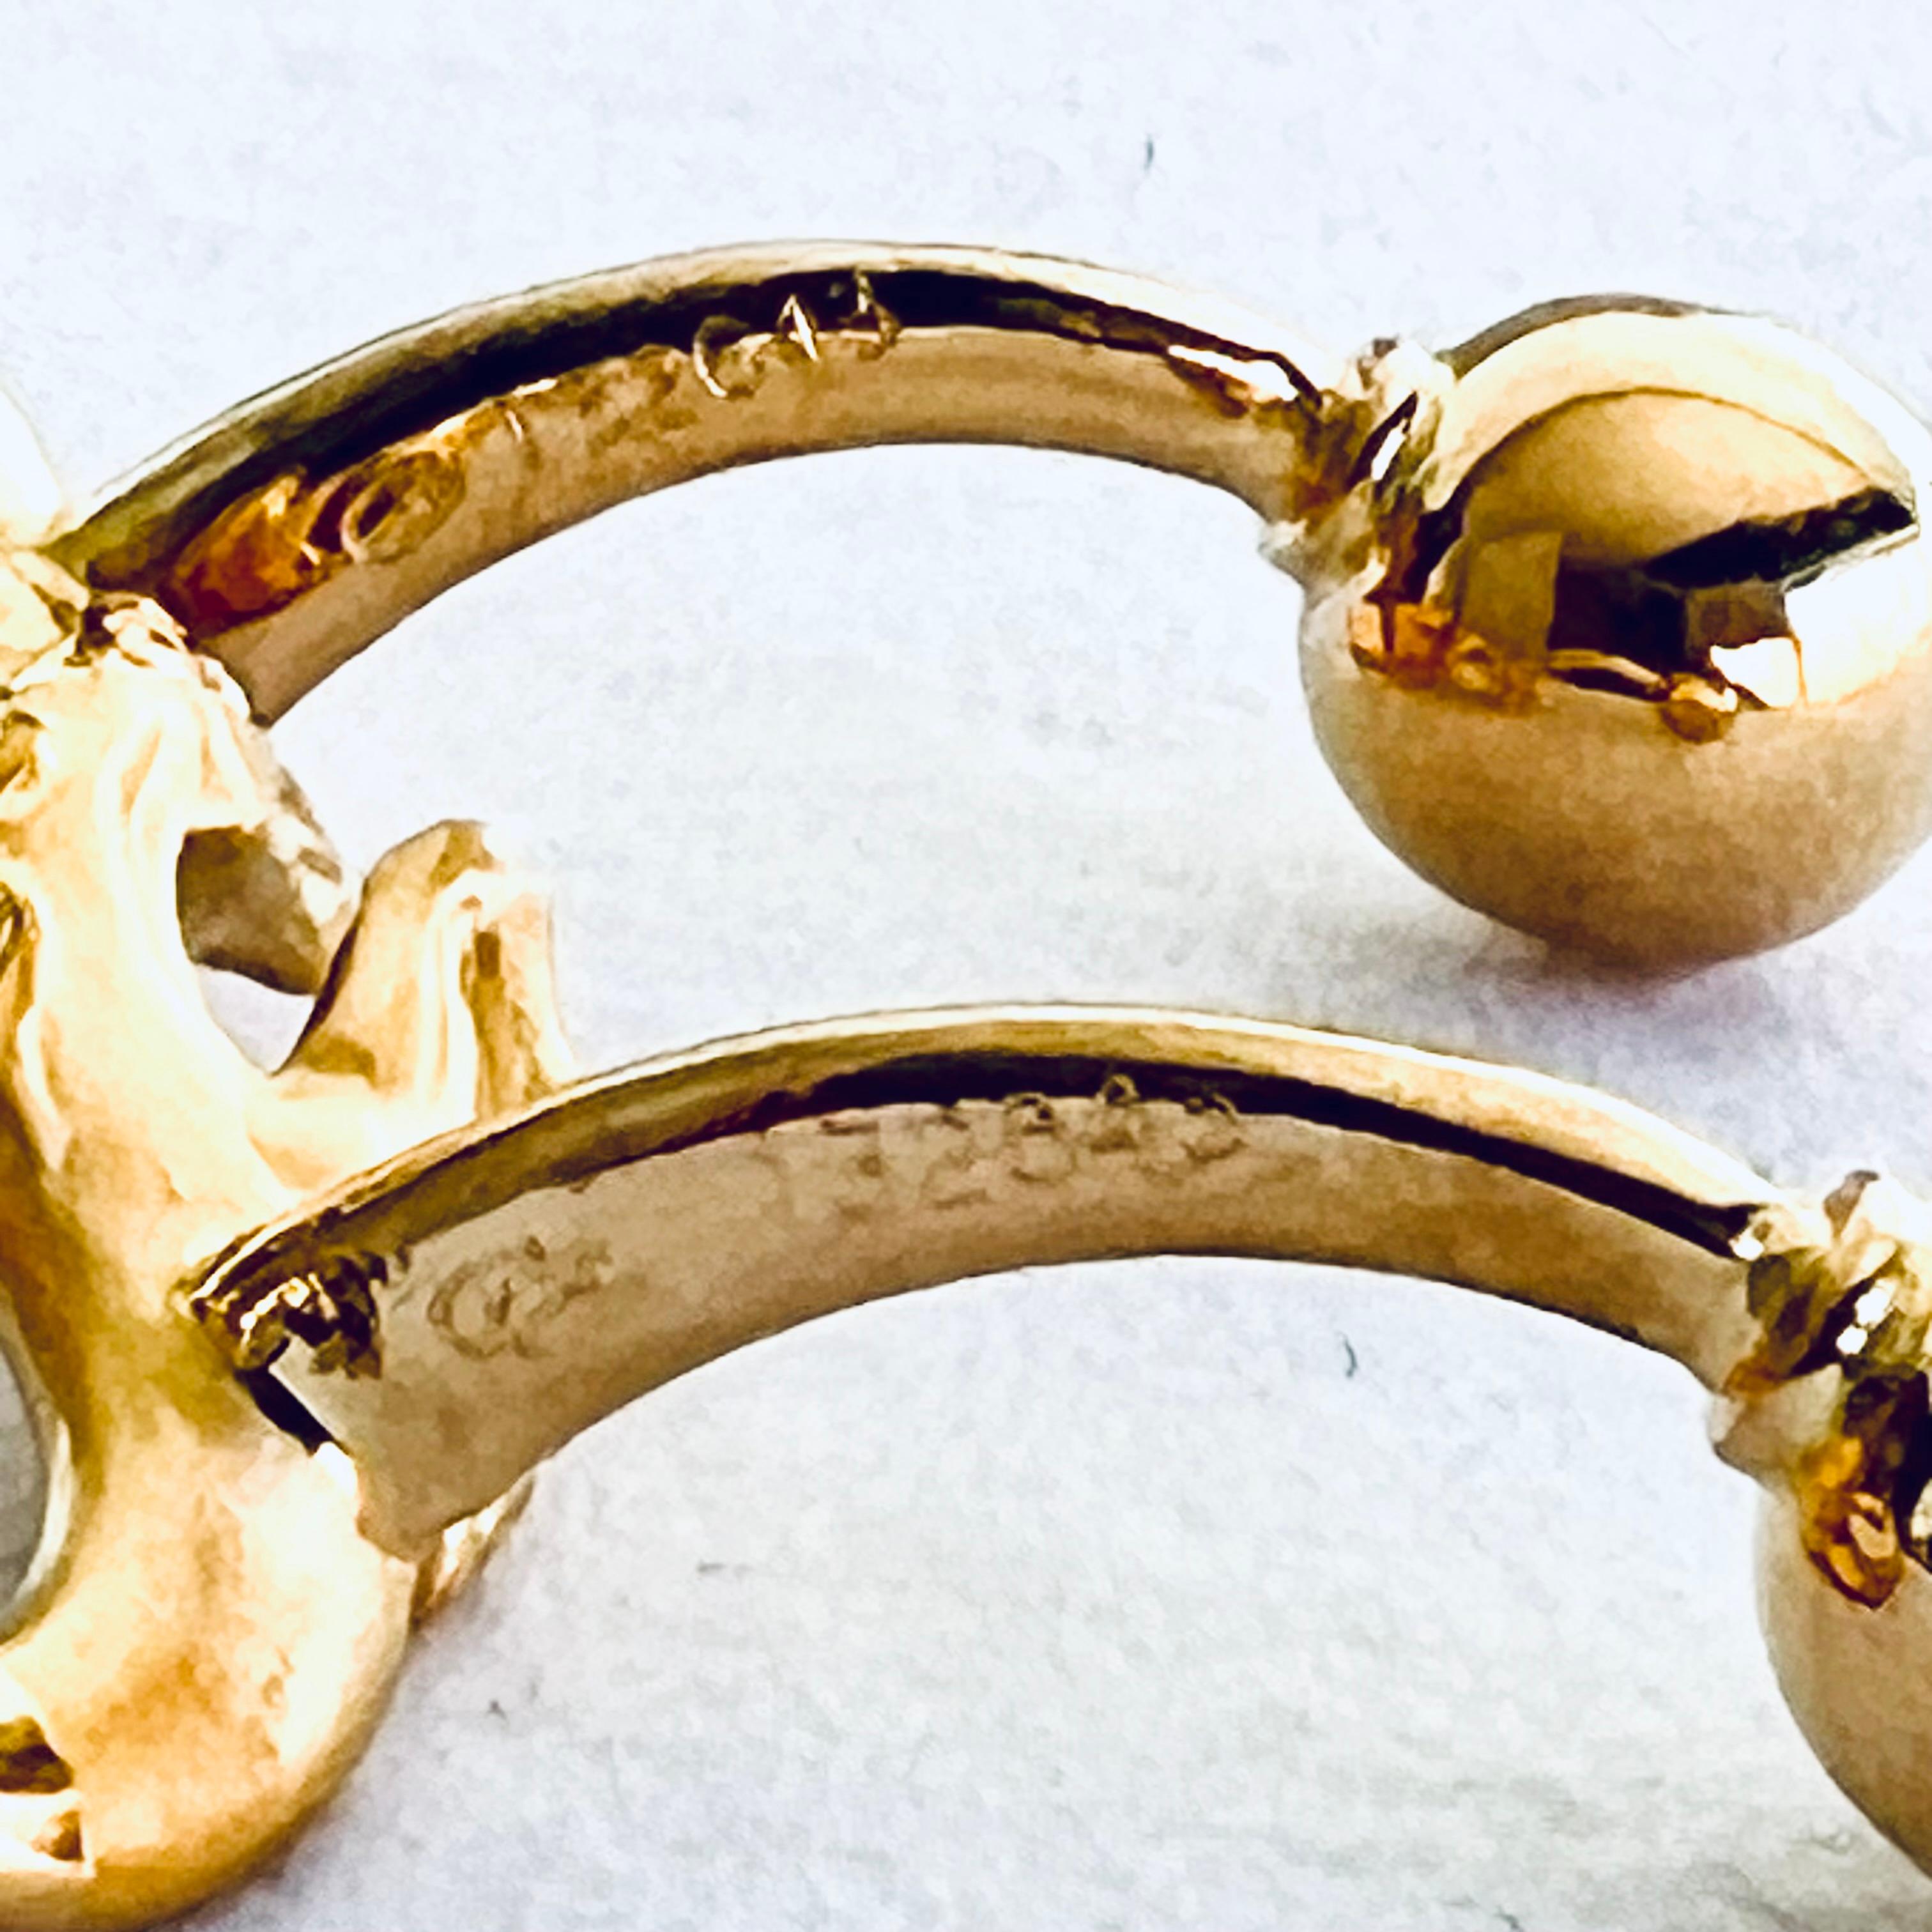 Carrera y Carrera Vintage 18 Karat Gold Leaping Horse 0.75 Inch Cufflinks 132643 For Sale 1